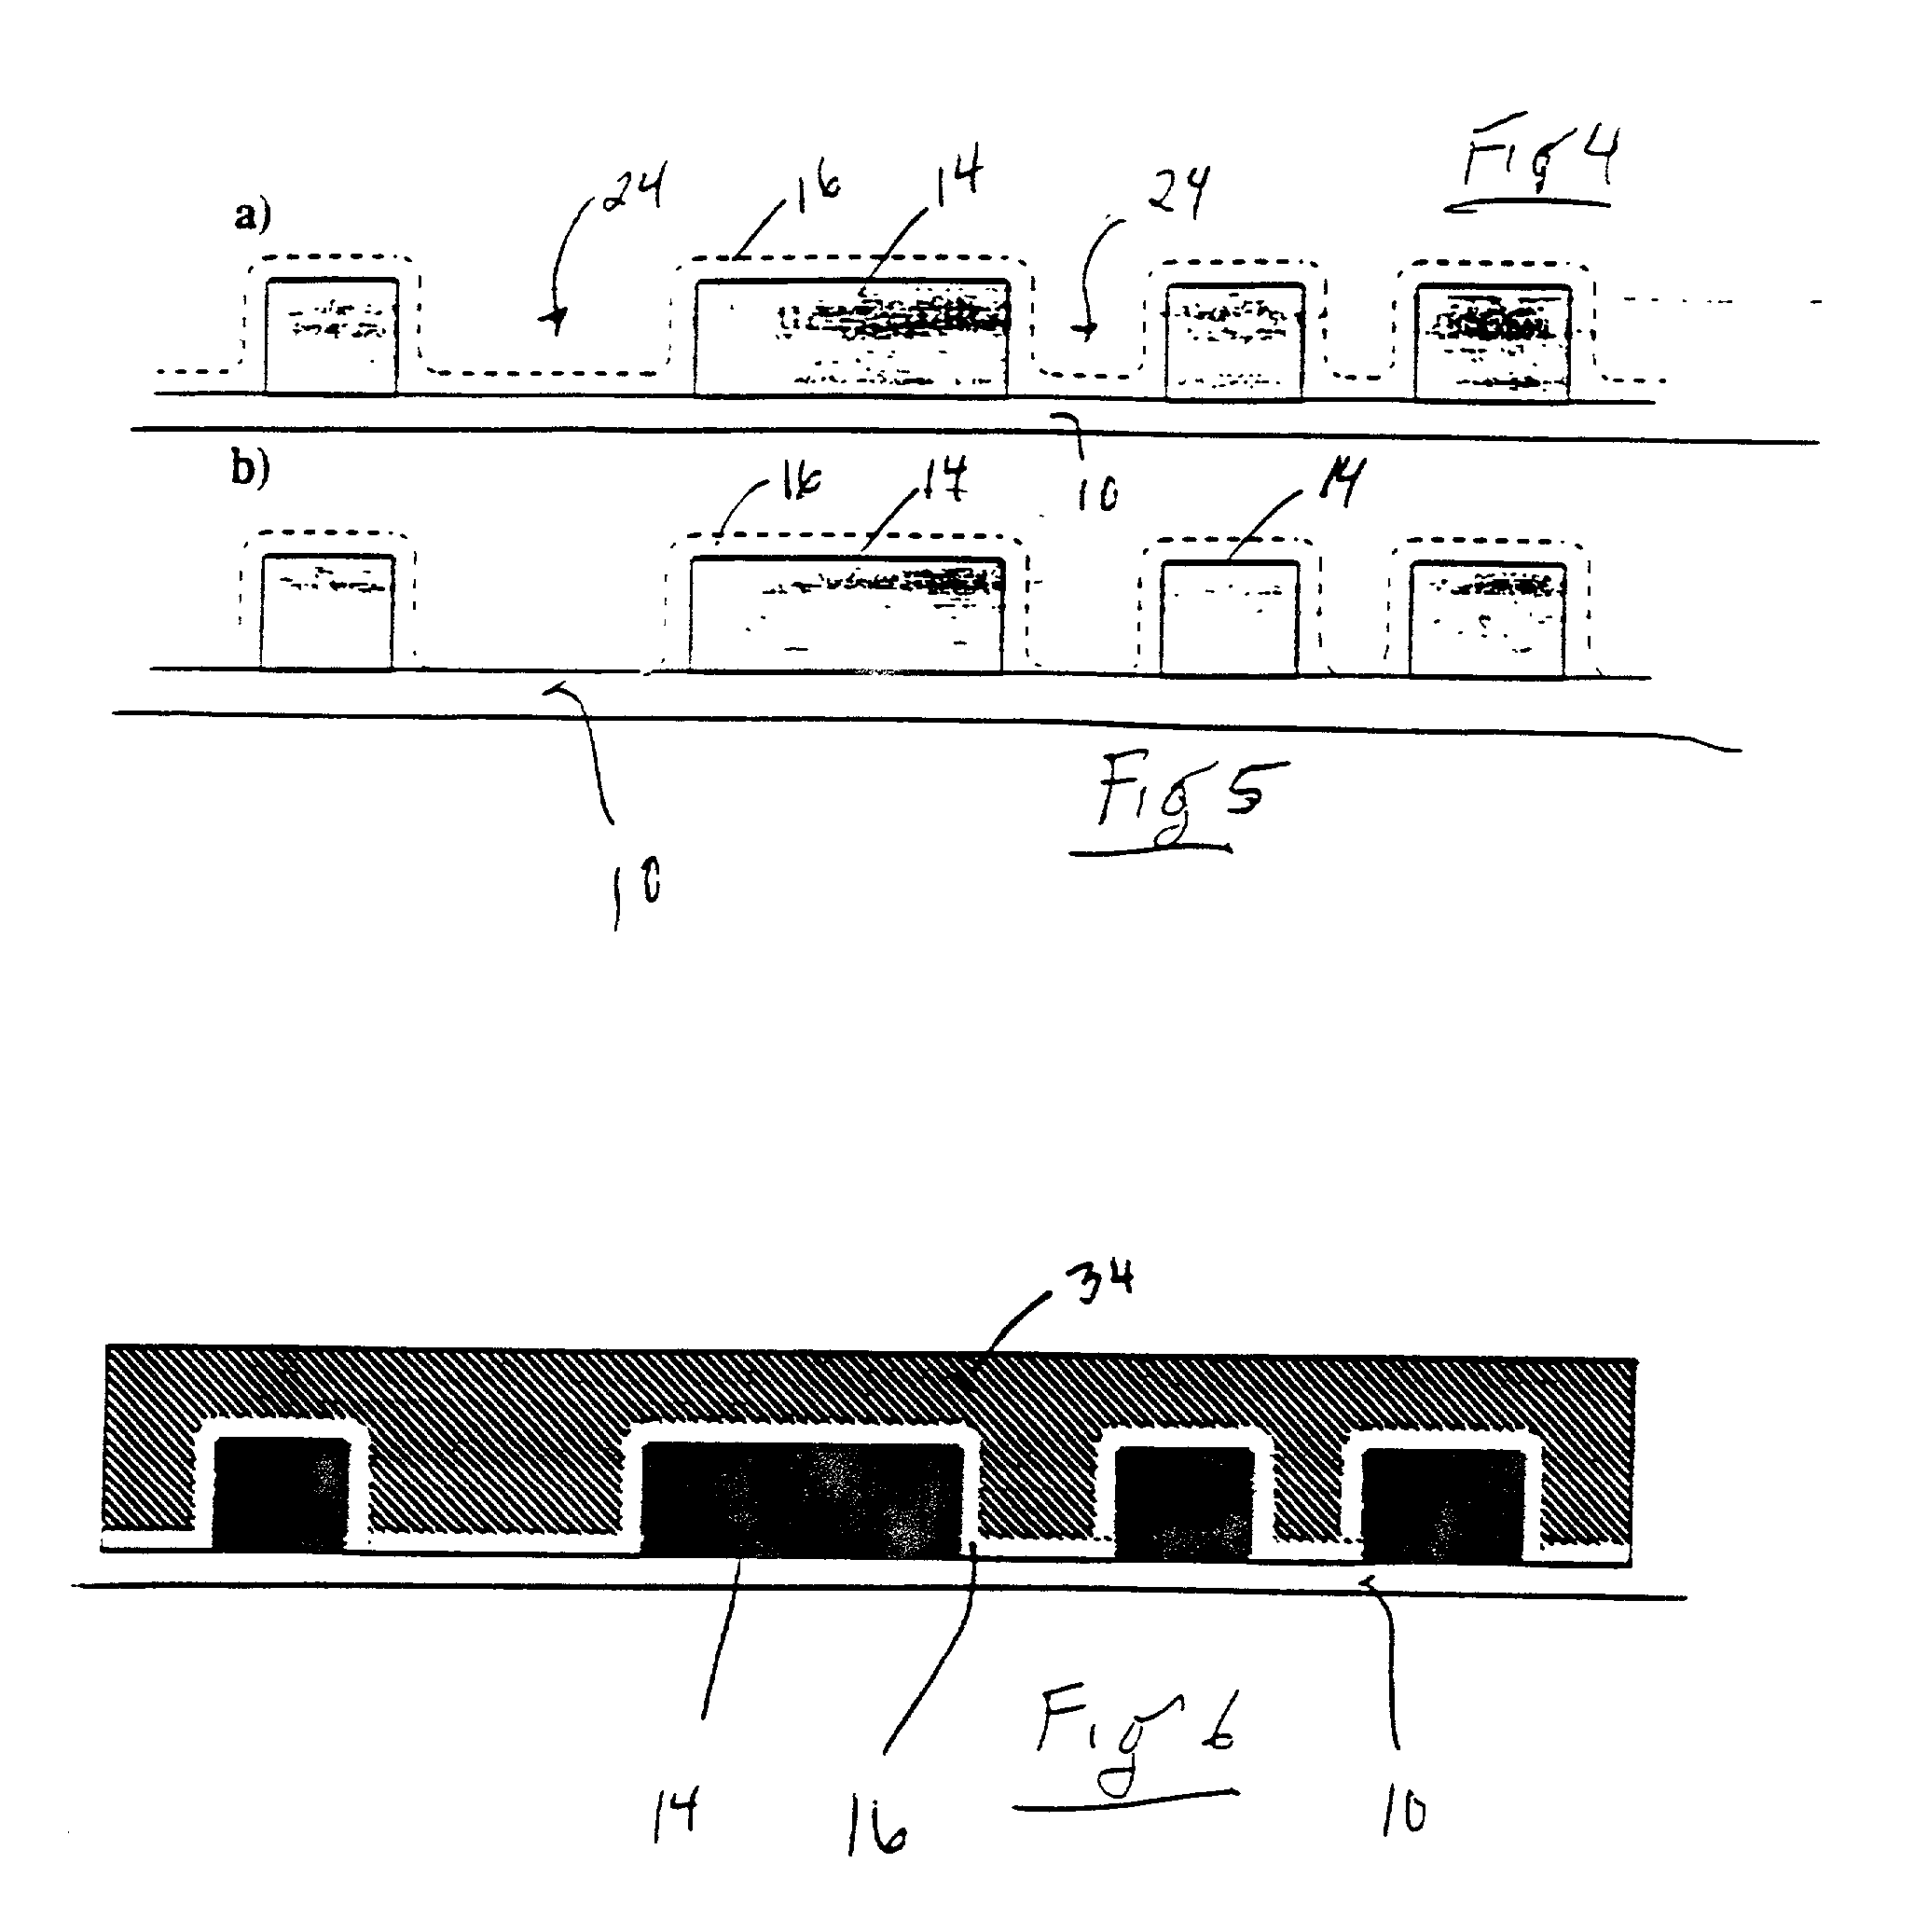 Structure and method for forming a multilayered structure